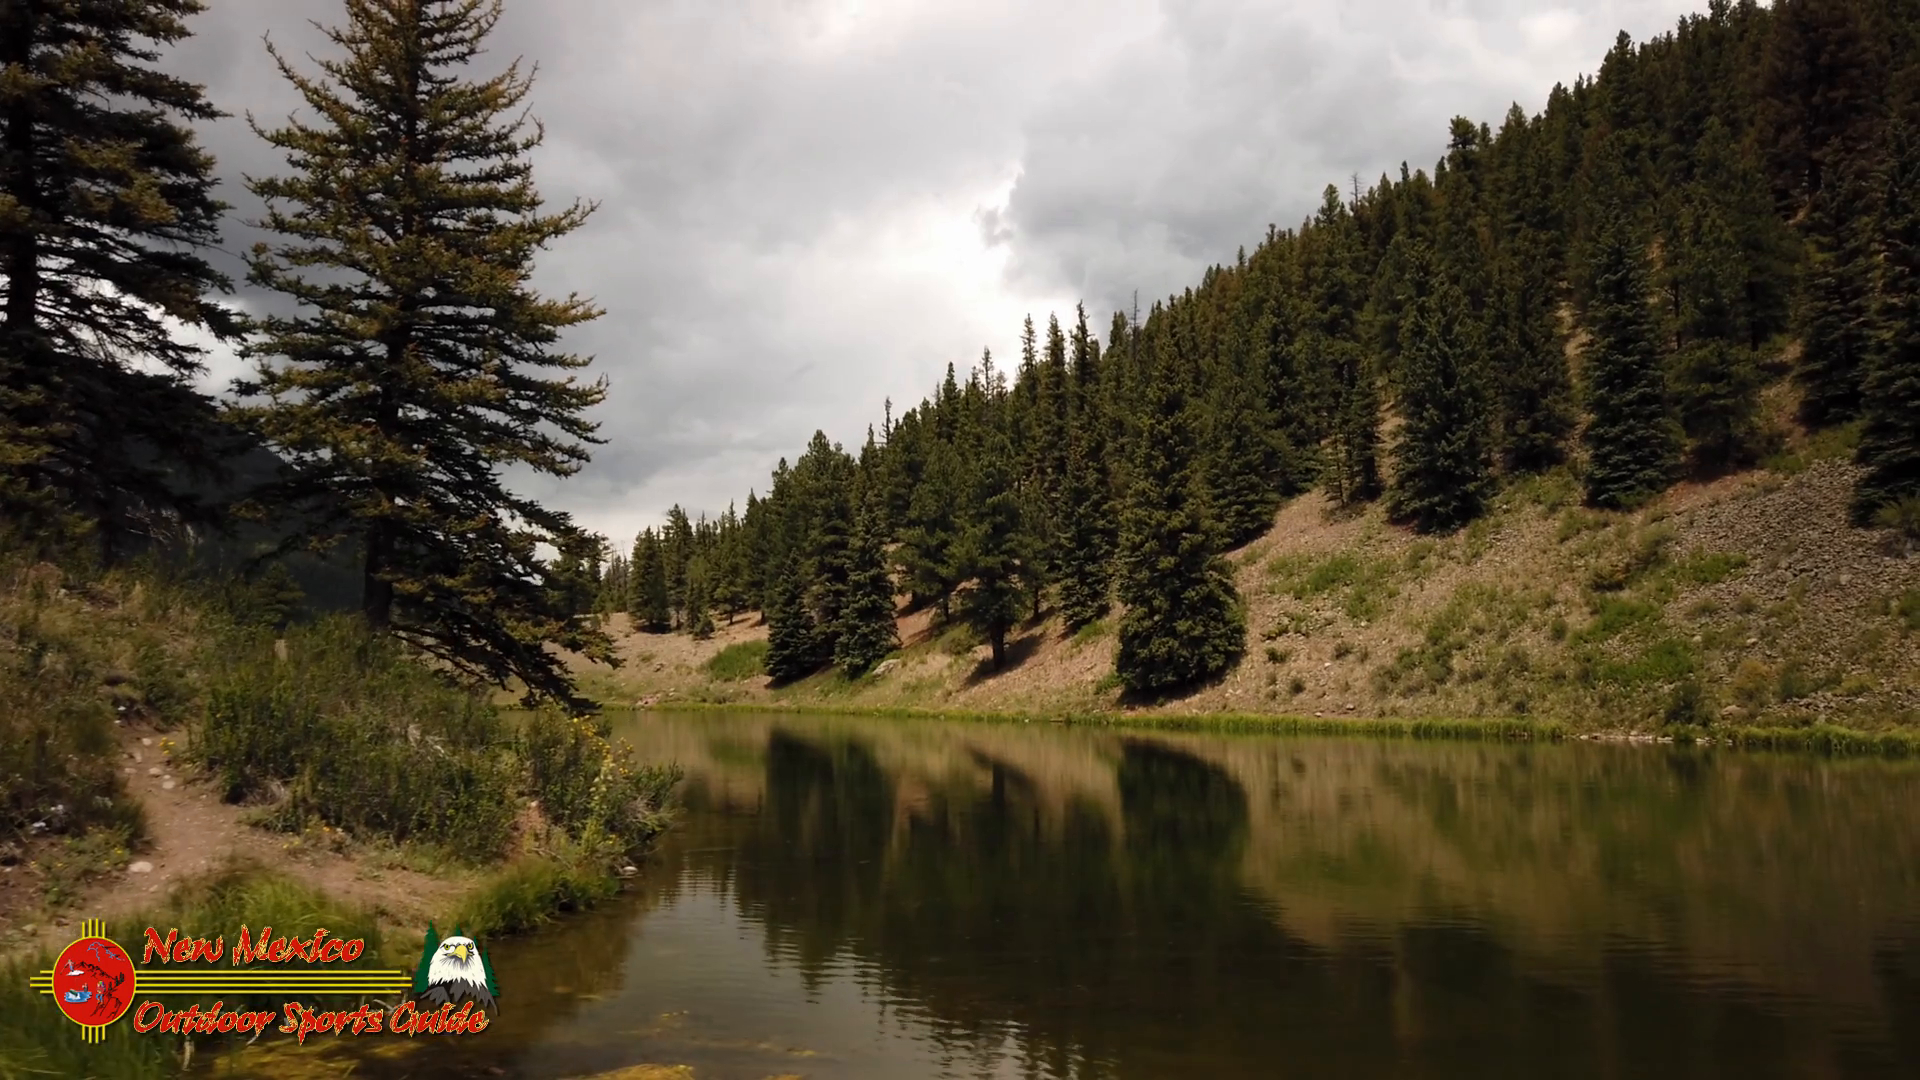 Spectacle Lake – Conejos River Trout Fishing Access